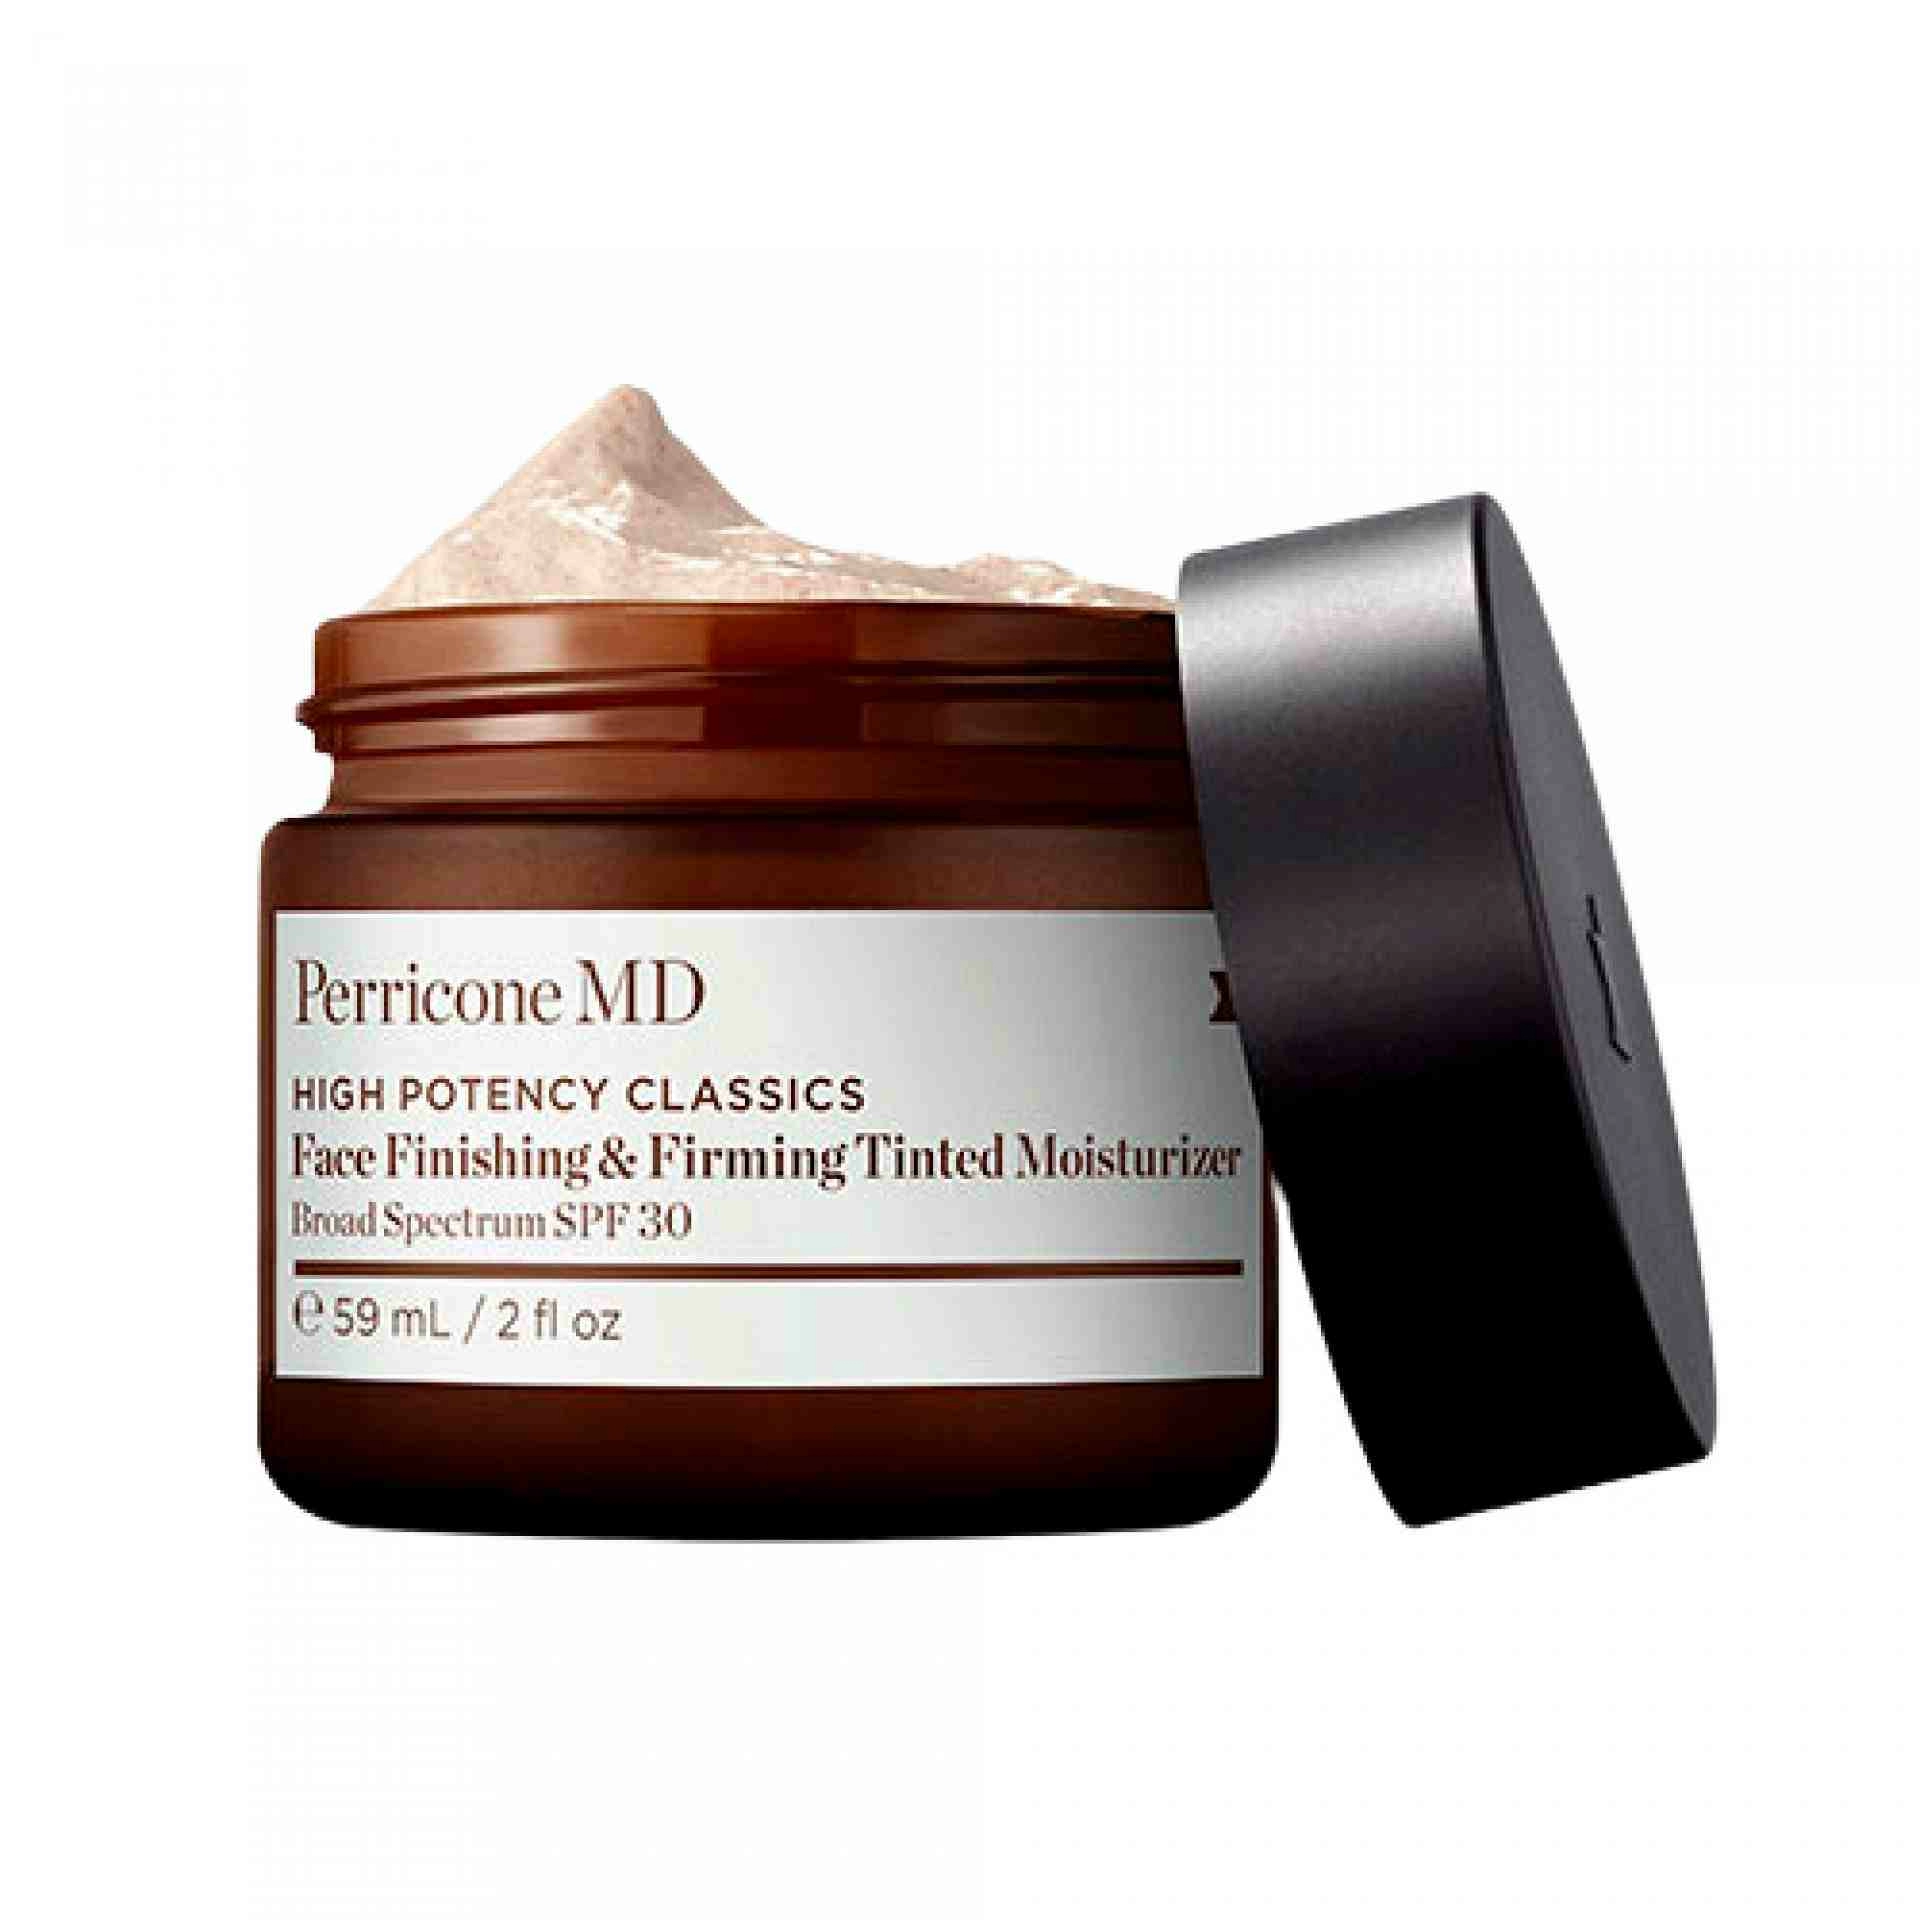 Face Finishing & Firming Tinted Moisturizer | Crema hidratante con color 59 ml - High Potency Classics - Perricone MD ®